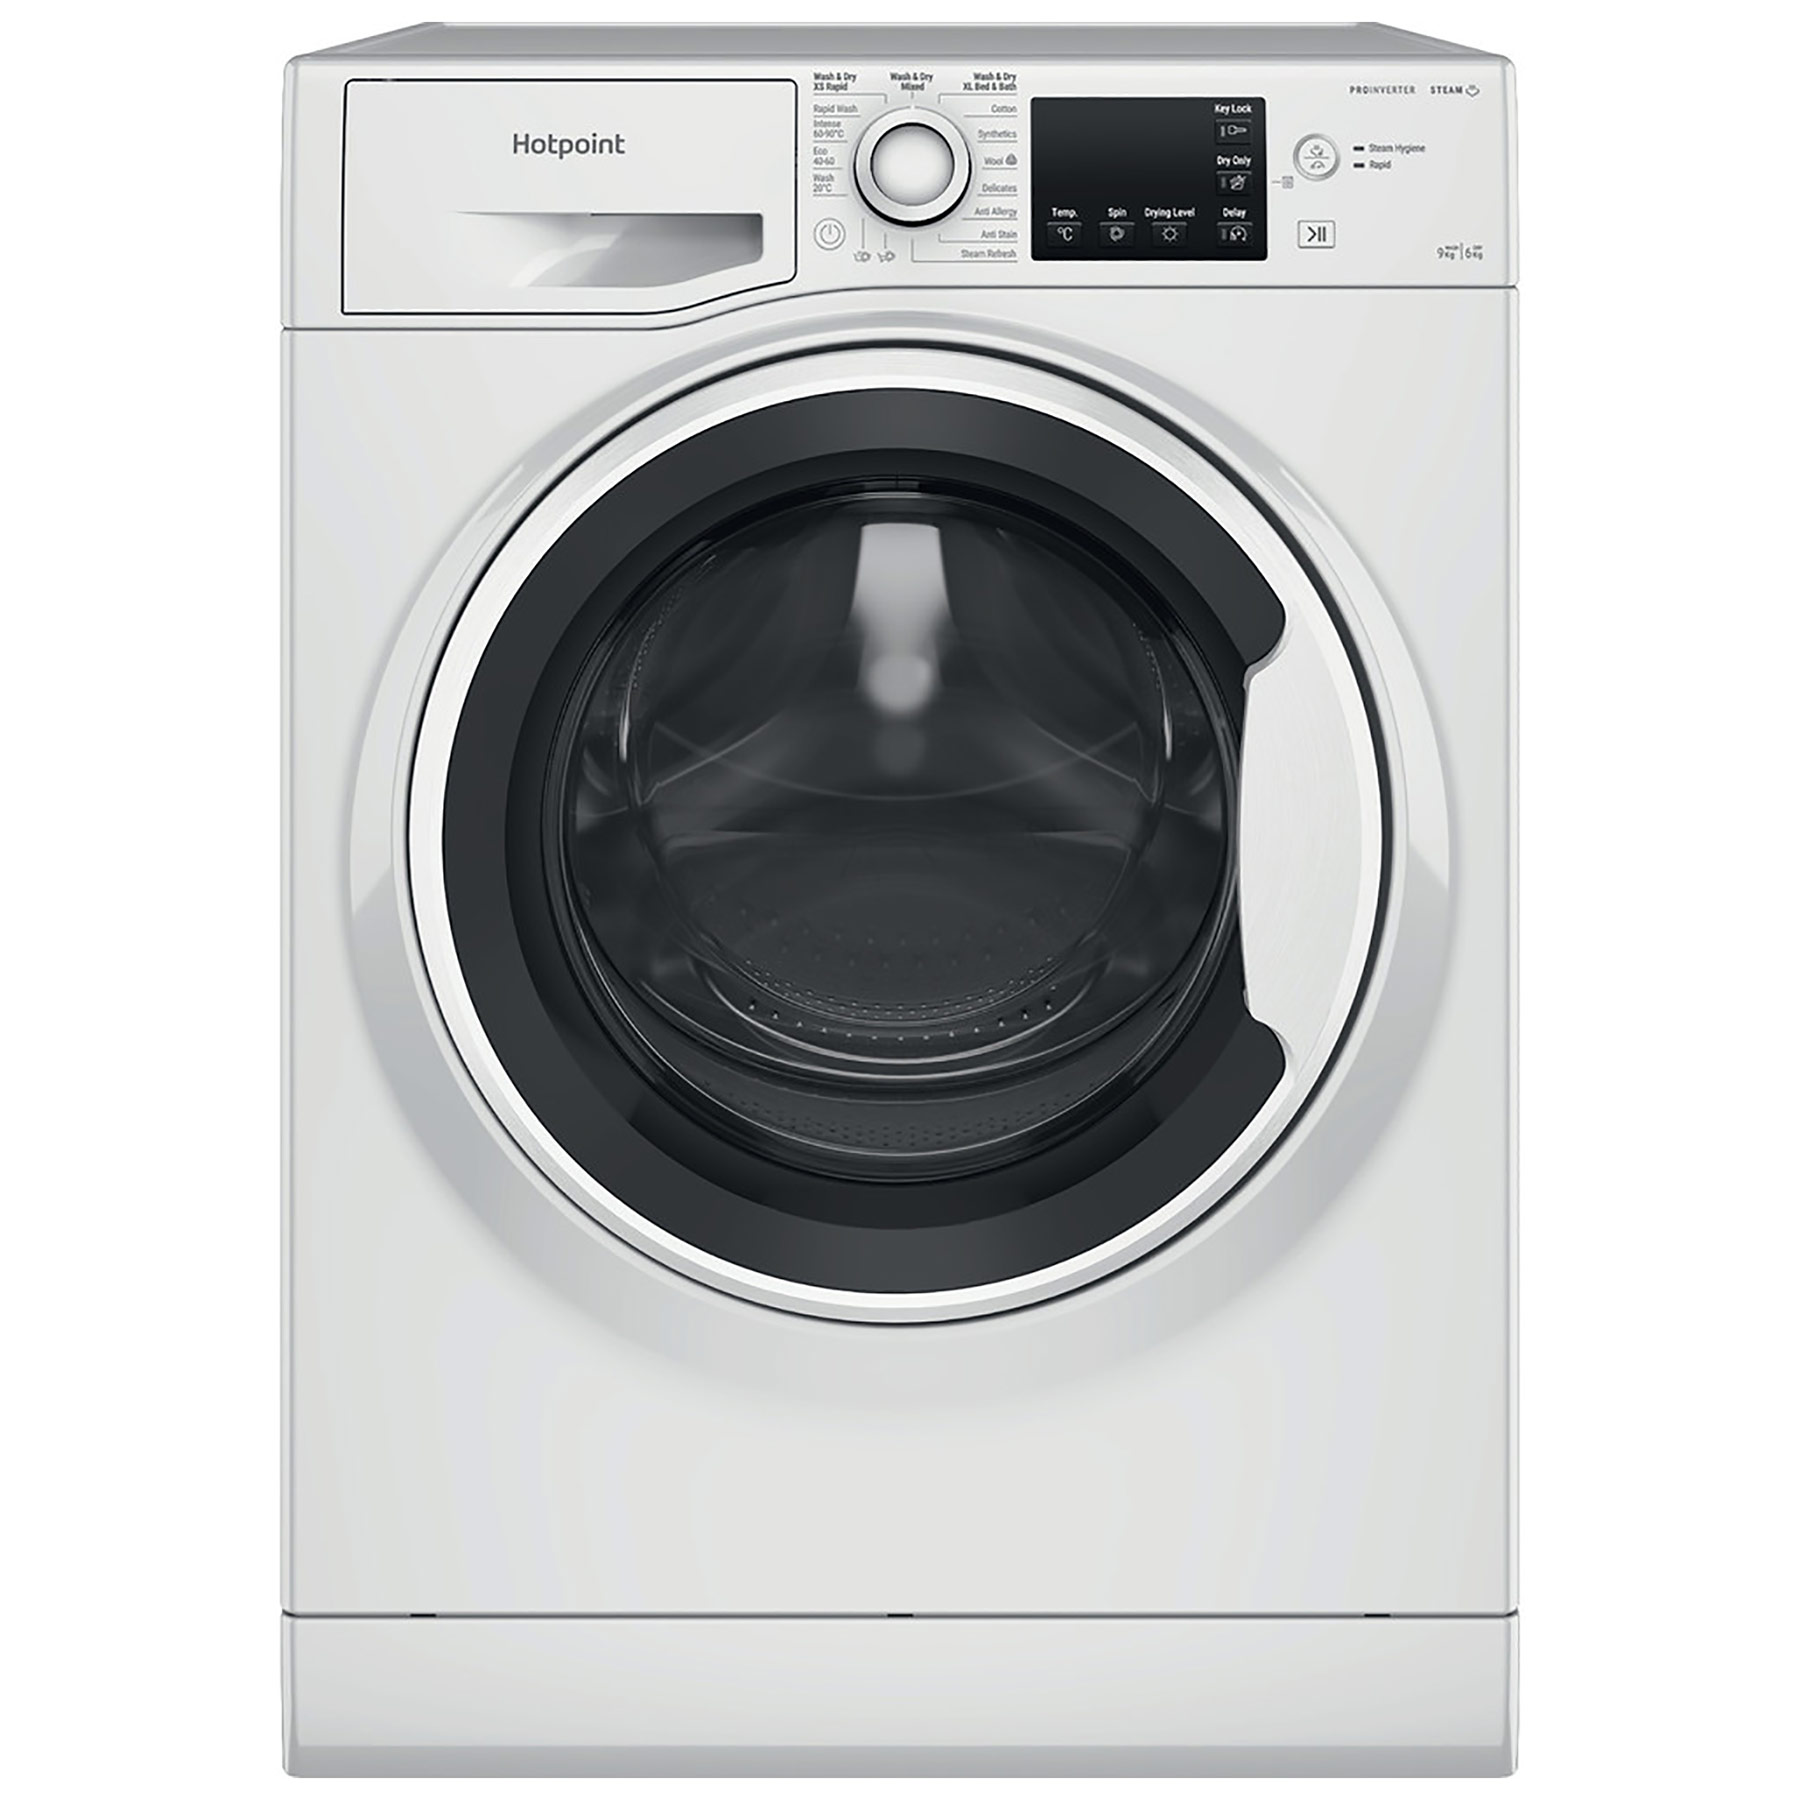 Image of Hotpoint NDB9635WUK Washer Dryer in White 1400rpm 9kg 6kg D Rated